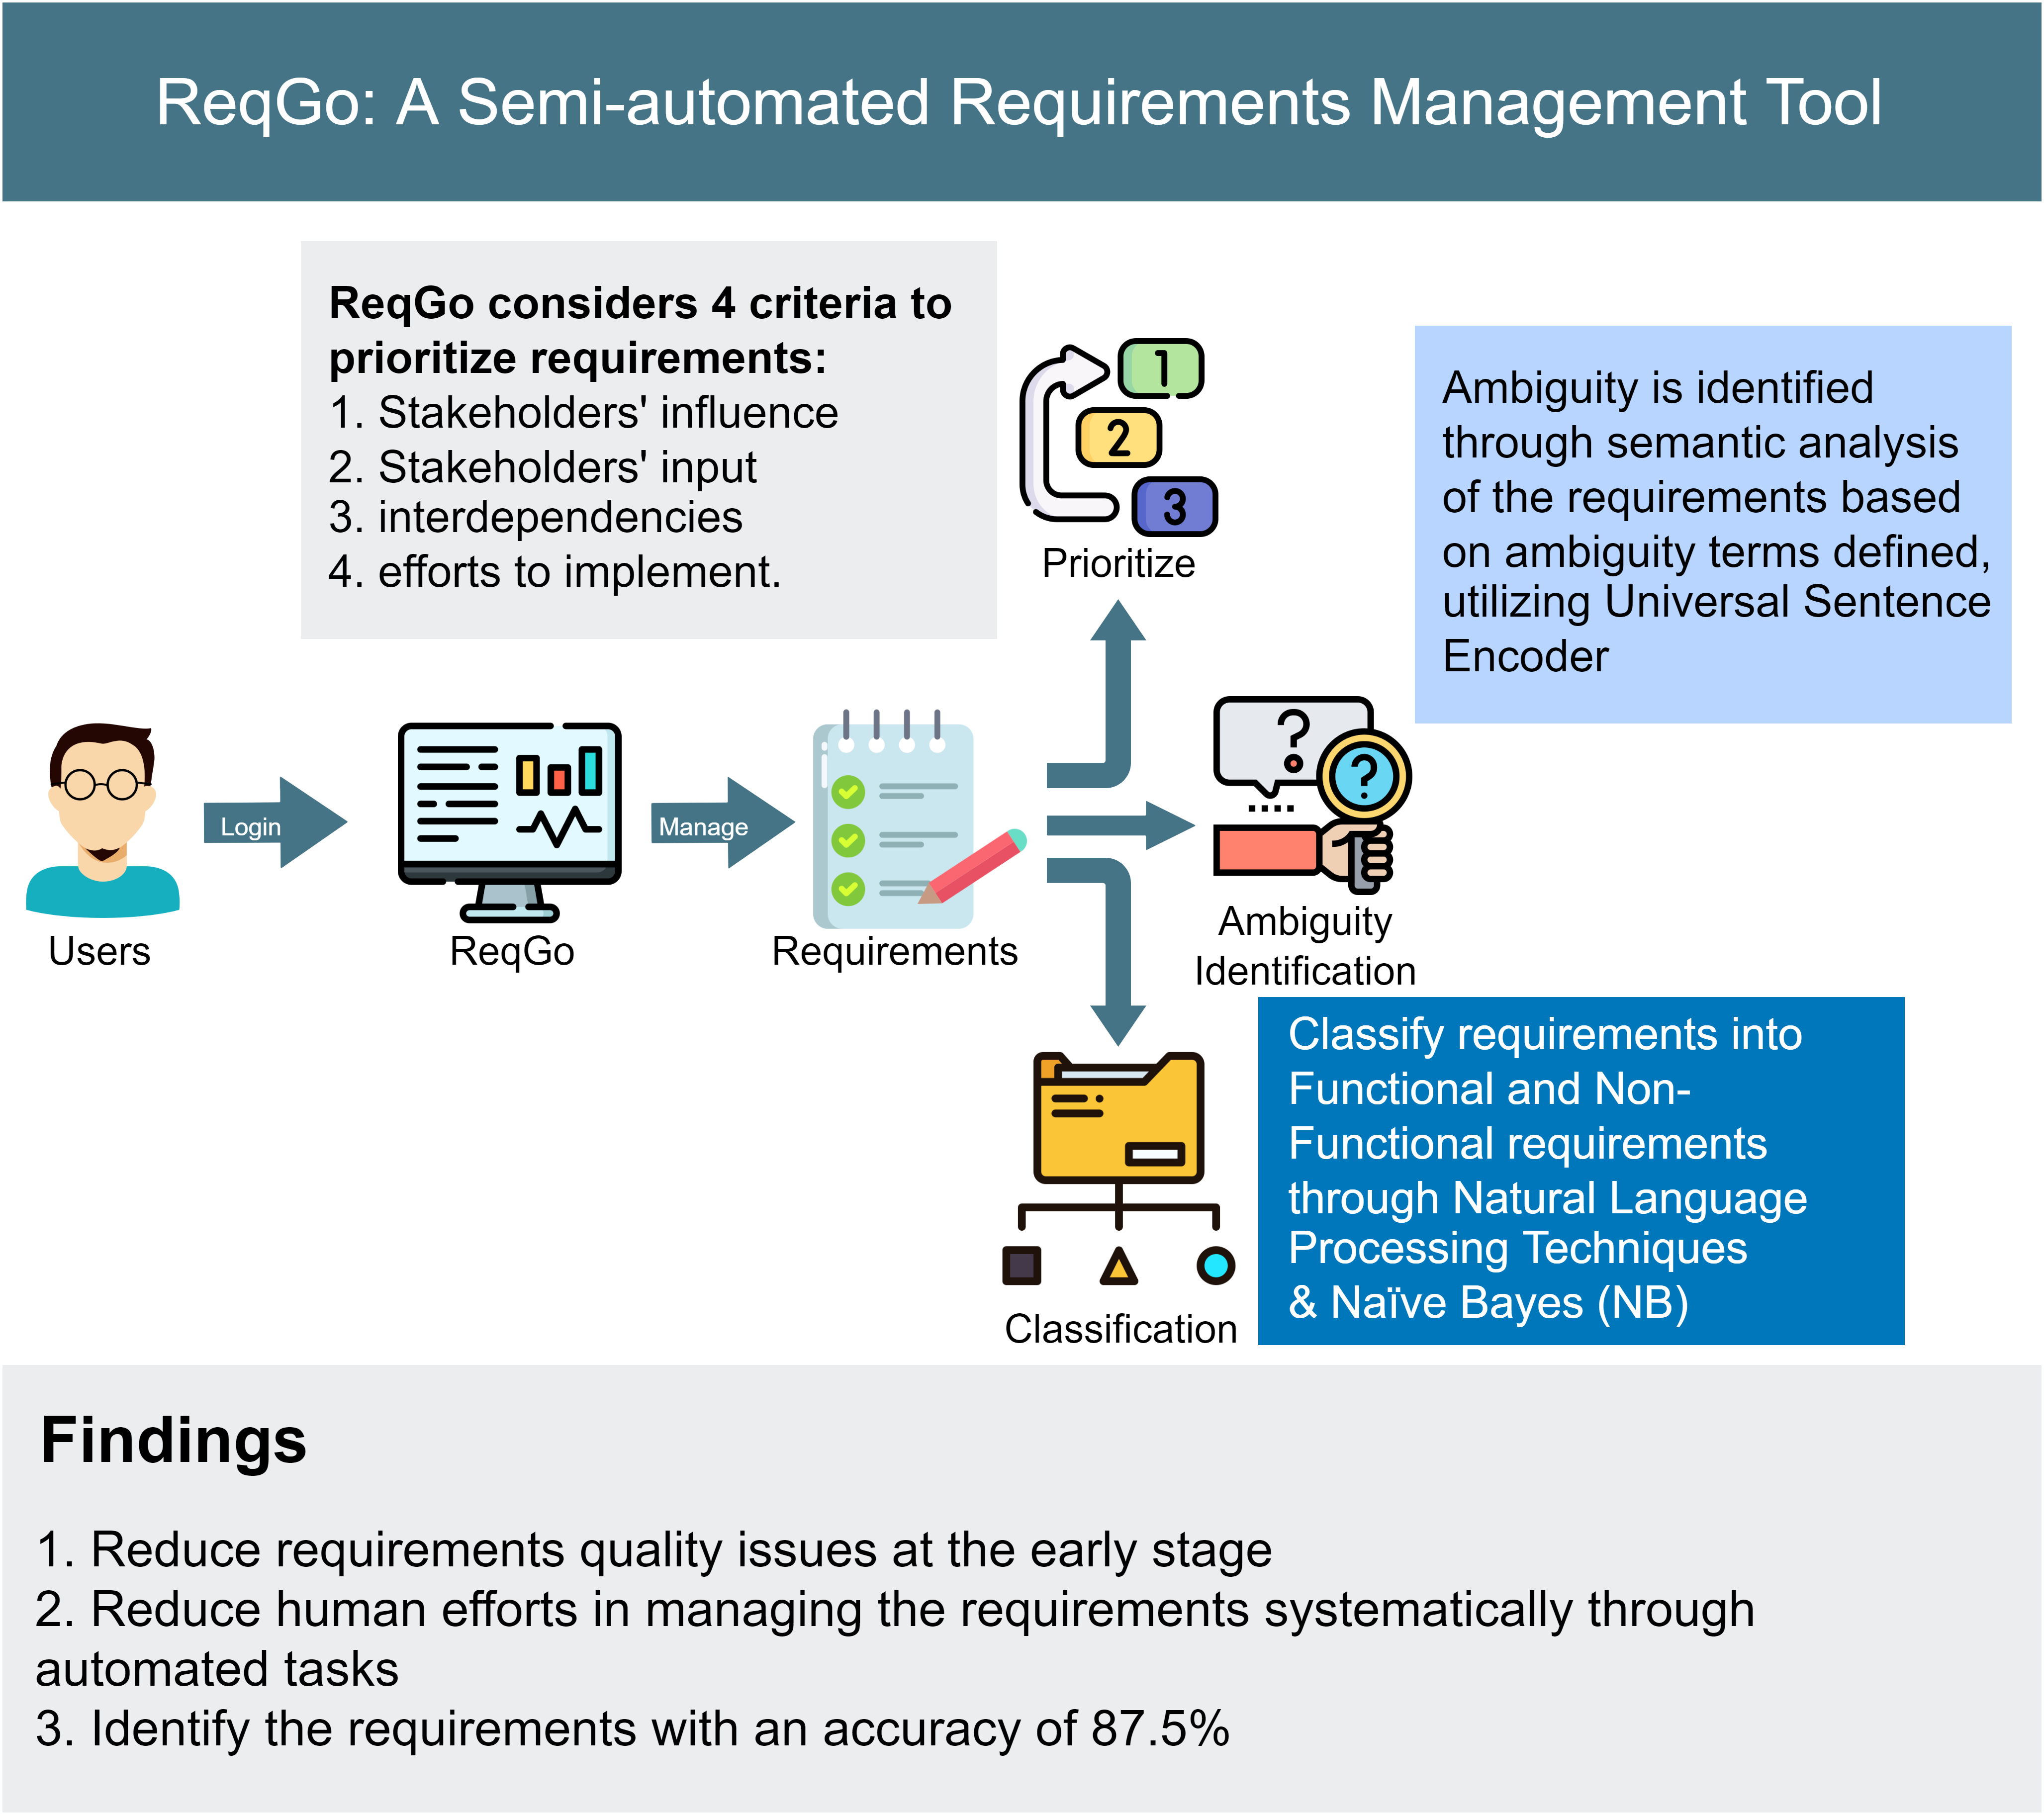 ReqGo: A Semi-Automated Requirements Management Tool